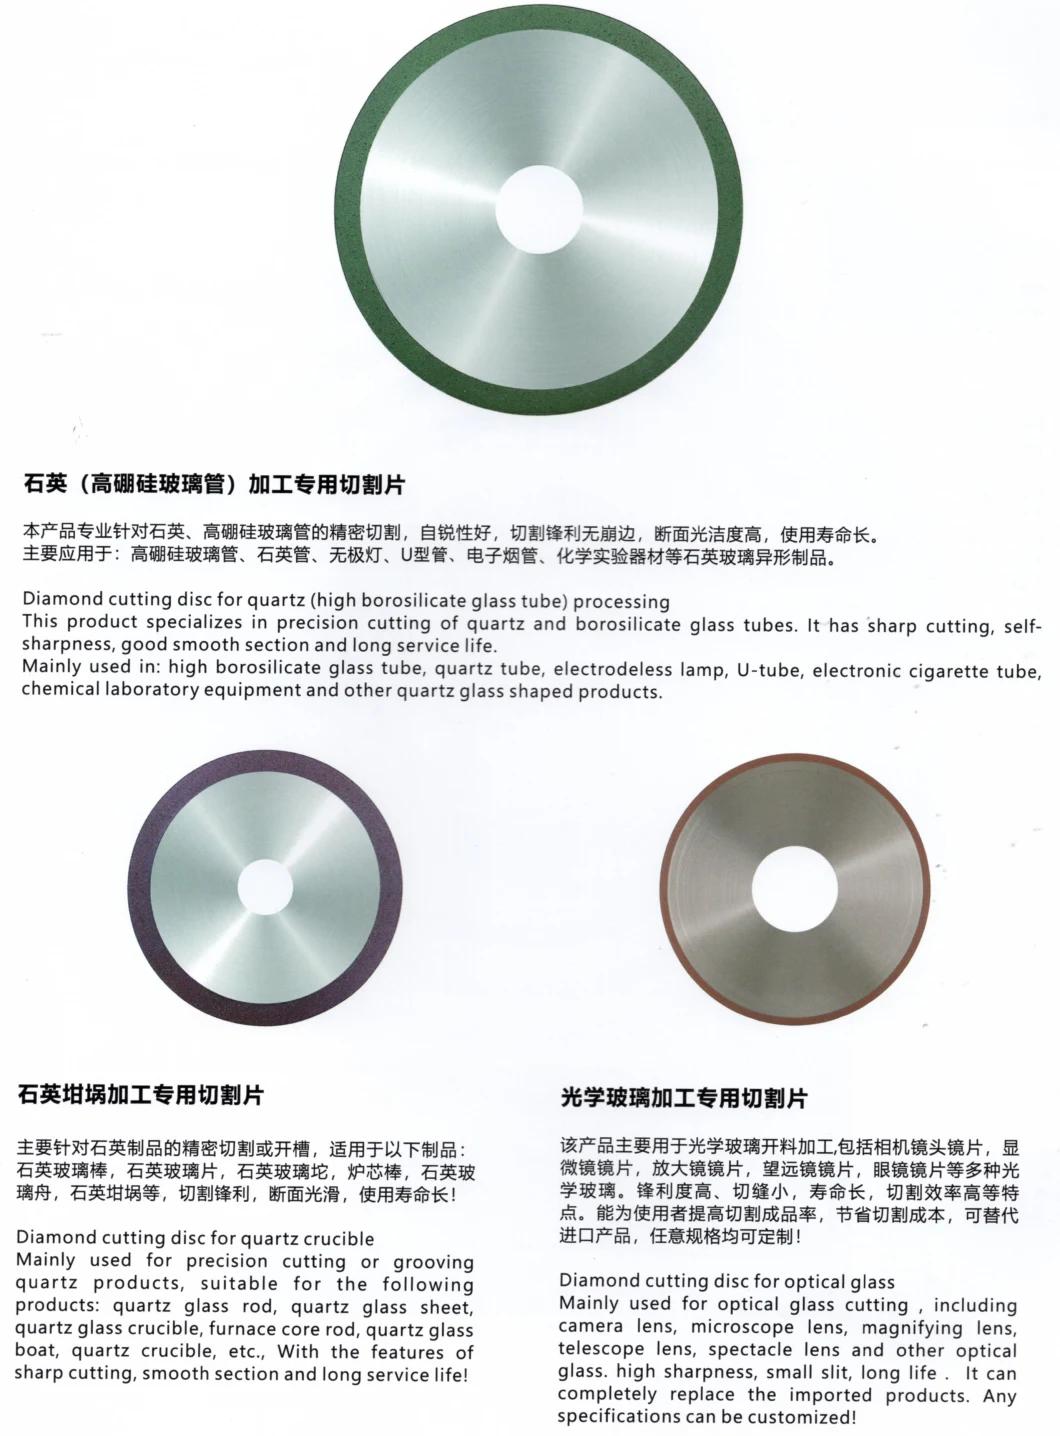 Meal Bonded Ultrathin Diamond Cutting Disc for Brake Pad Grooving